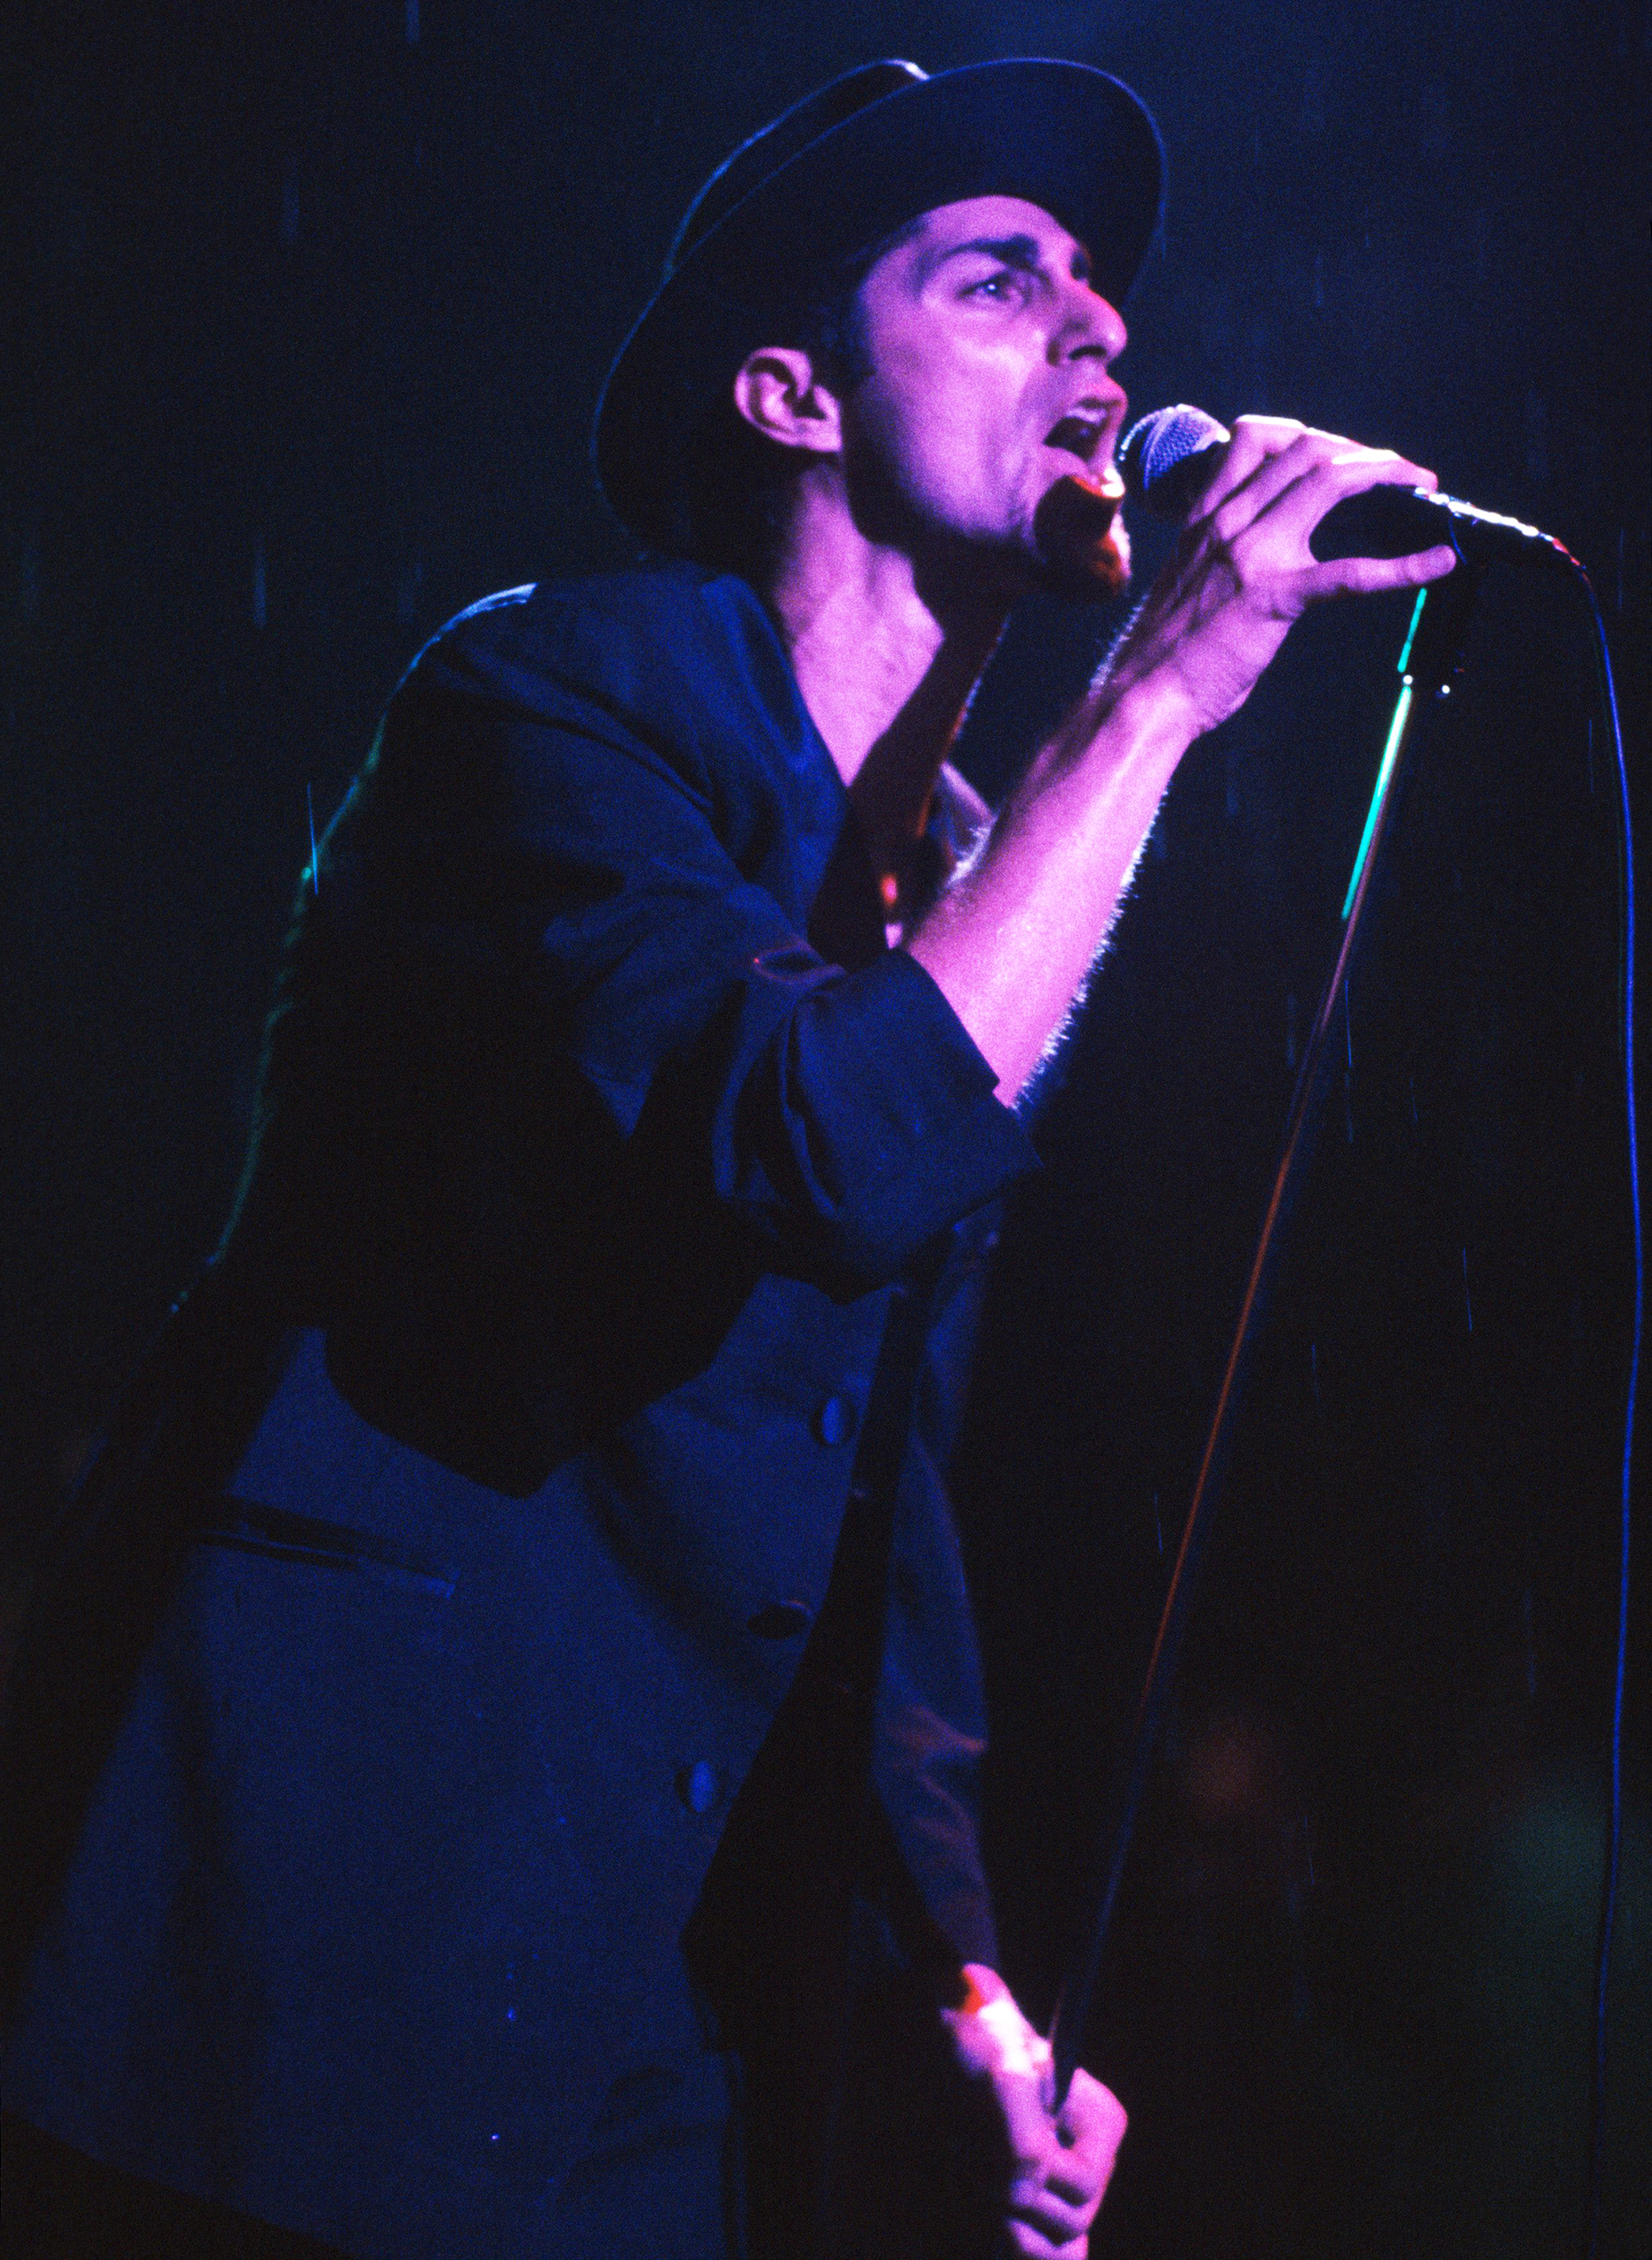 Perry Farrell performs with Jane's Addiction in Waterloo Village, N.J., on Aug. 14, 1991.